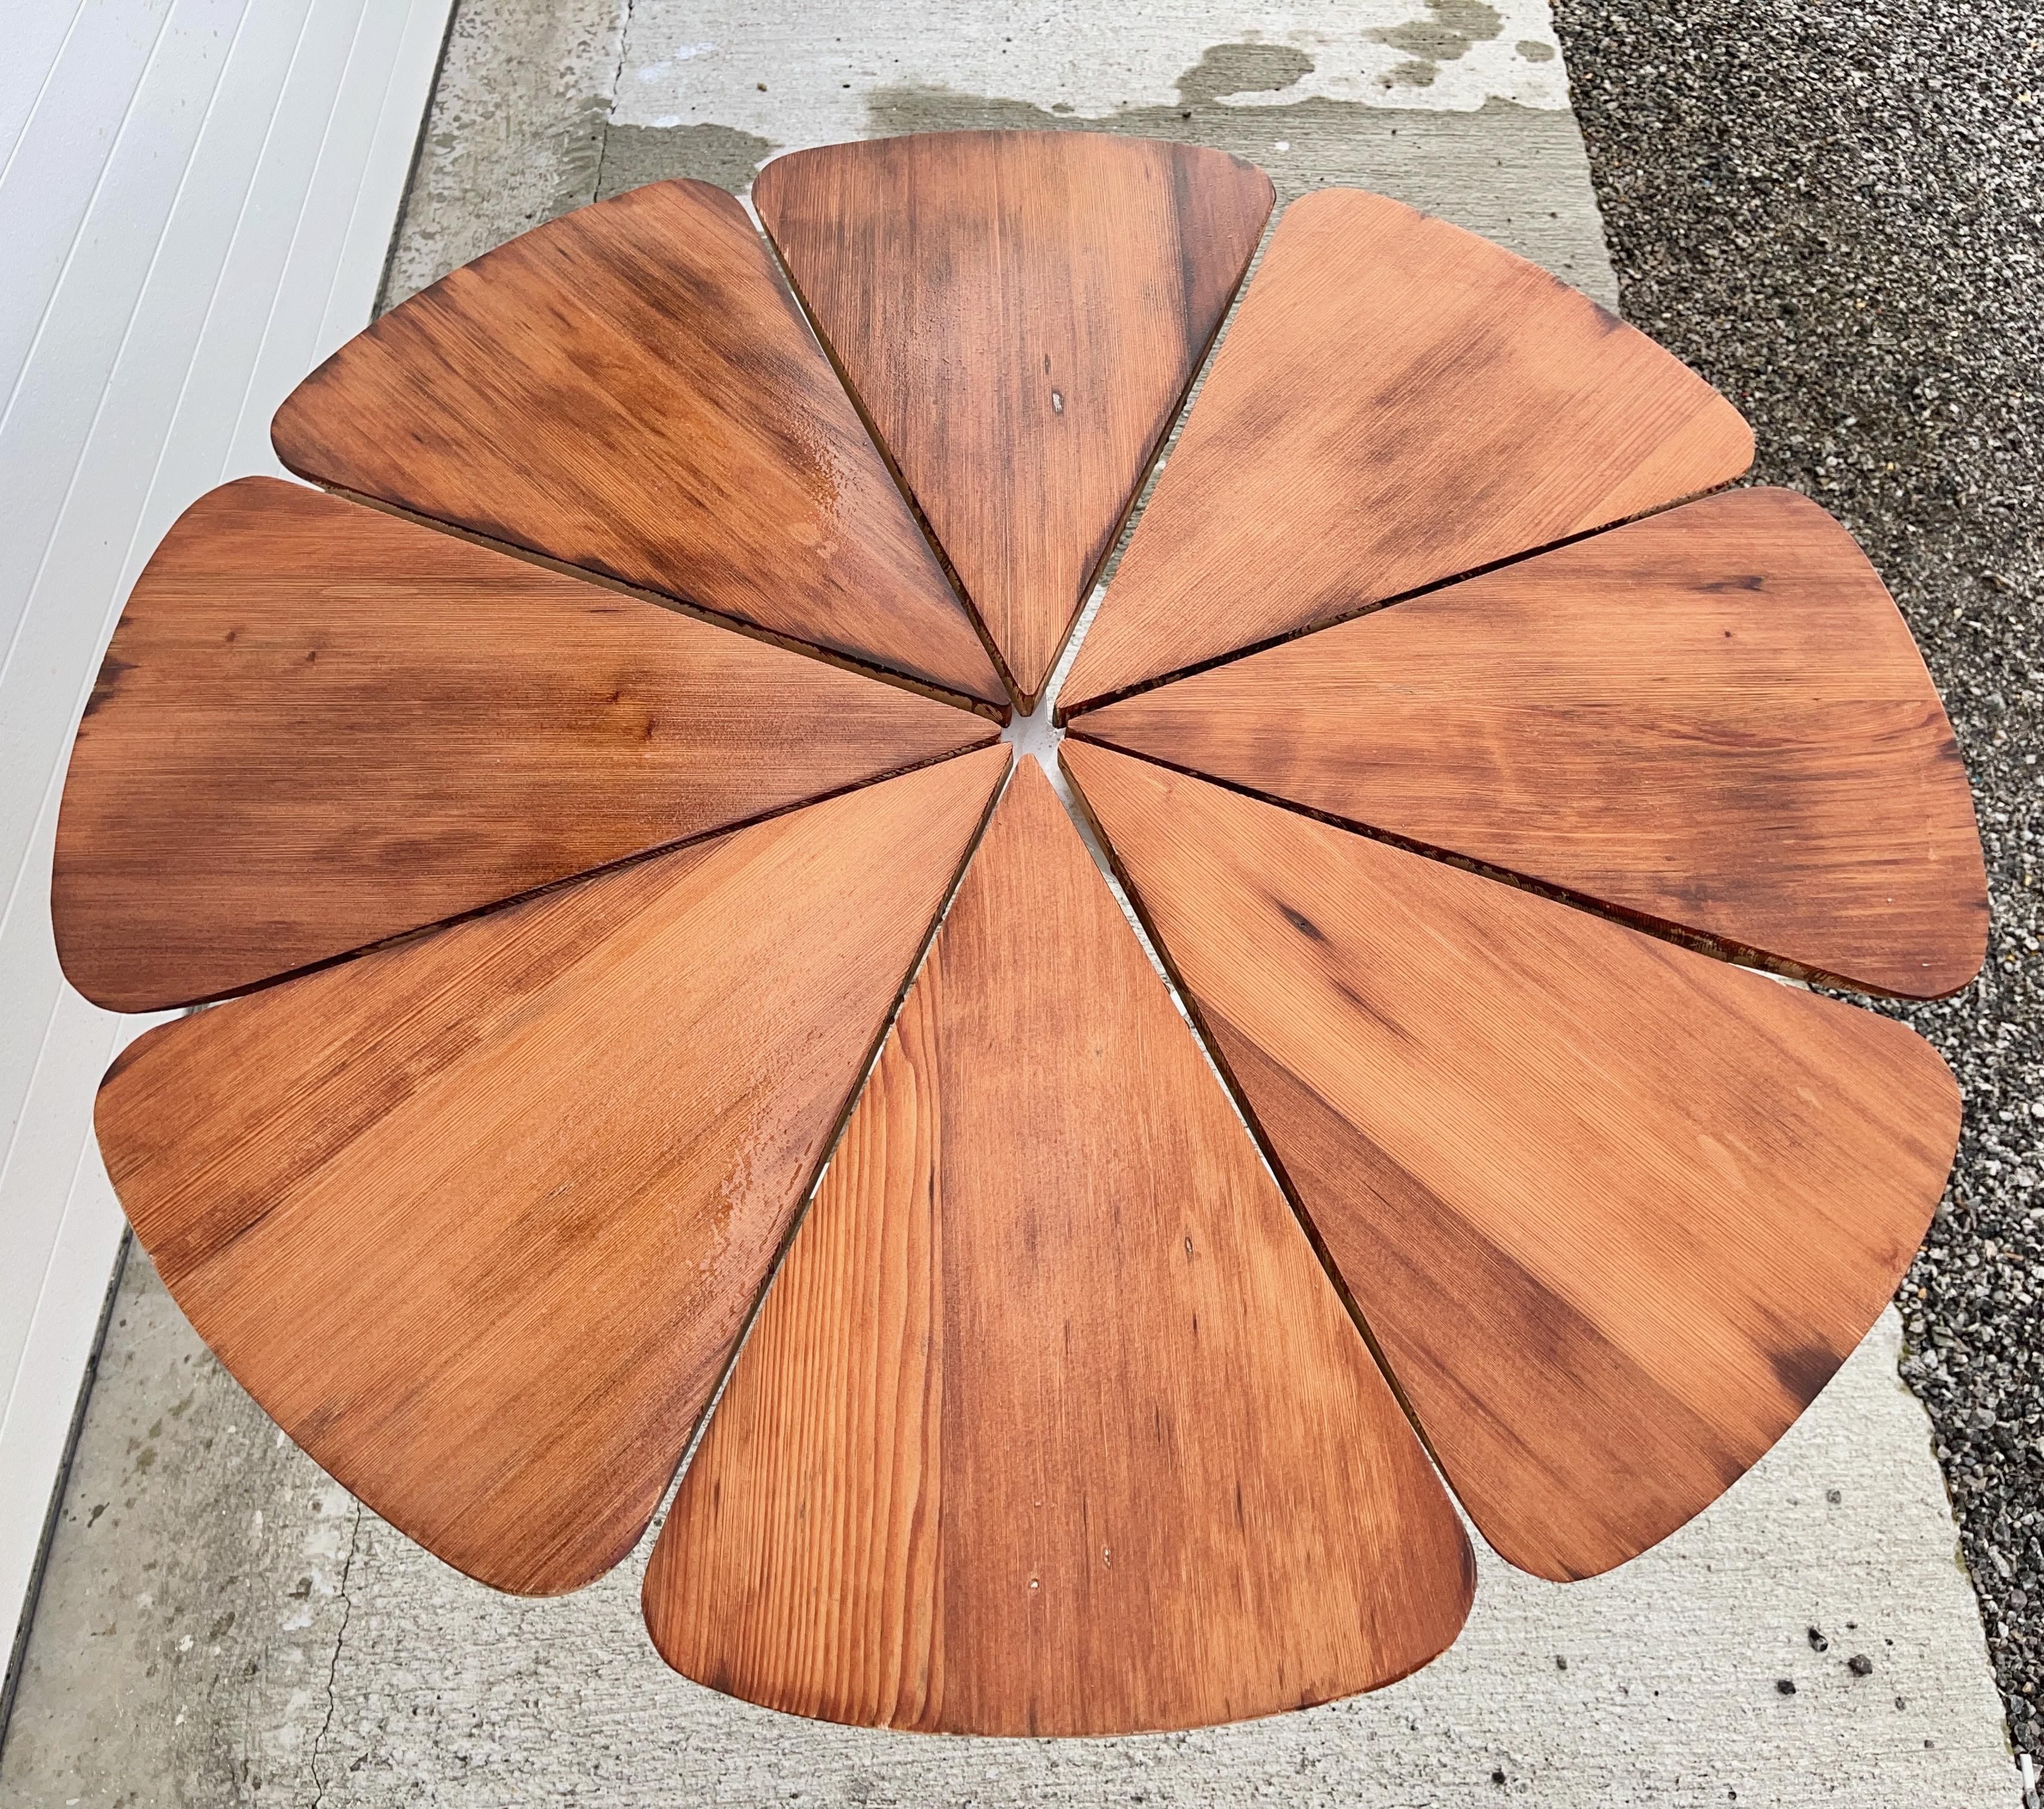 1961 Petal Dining Table by Richard Schultz for Knoll in California Redwood For Sale 7